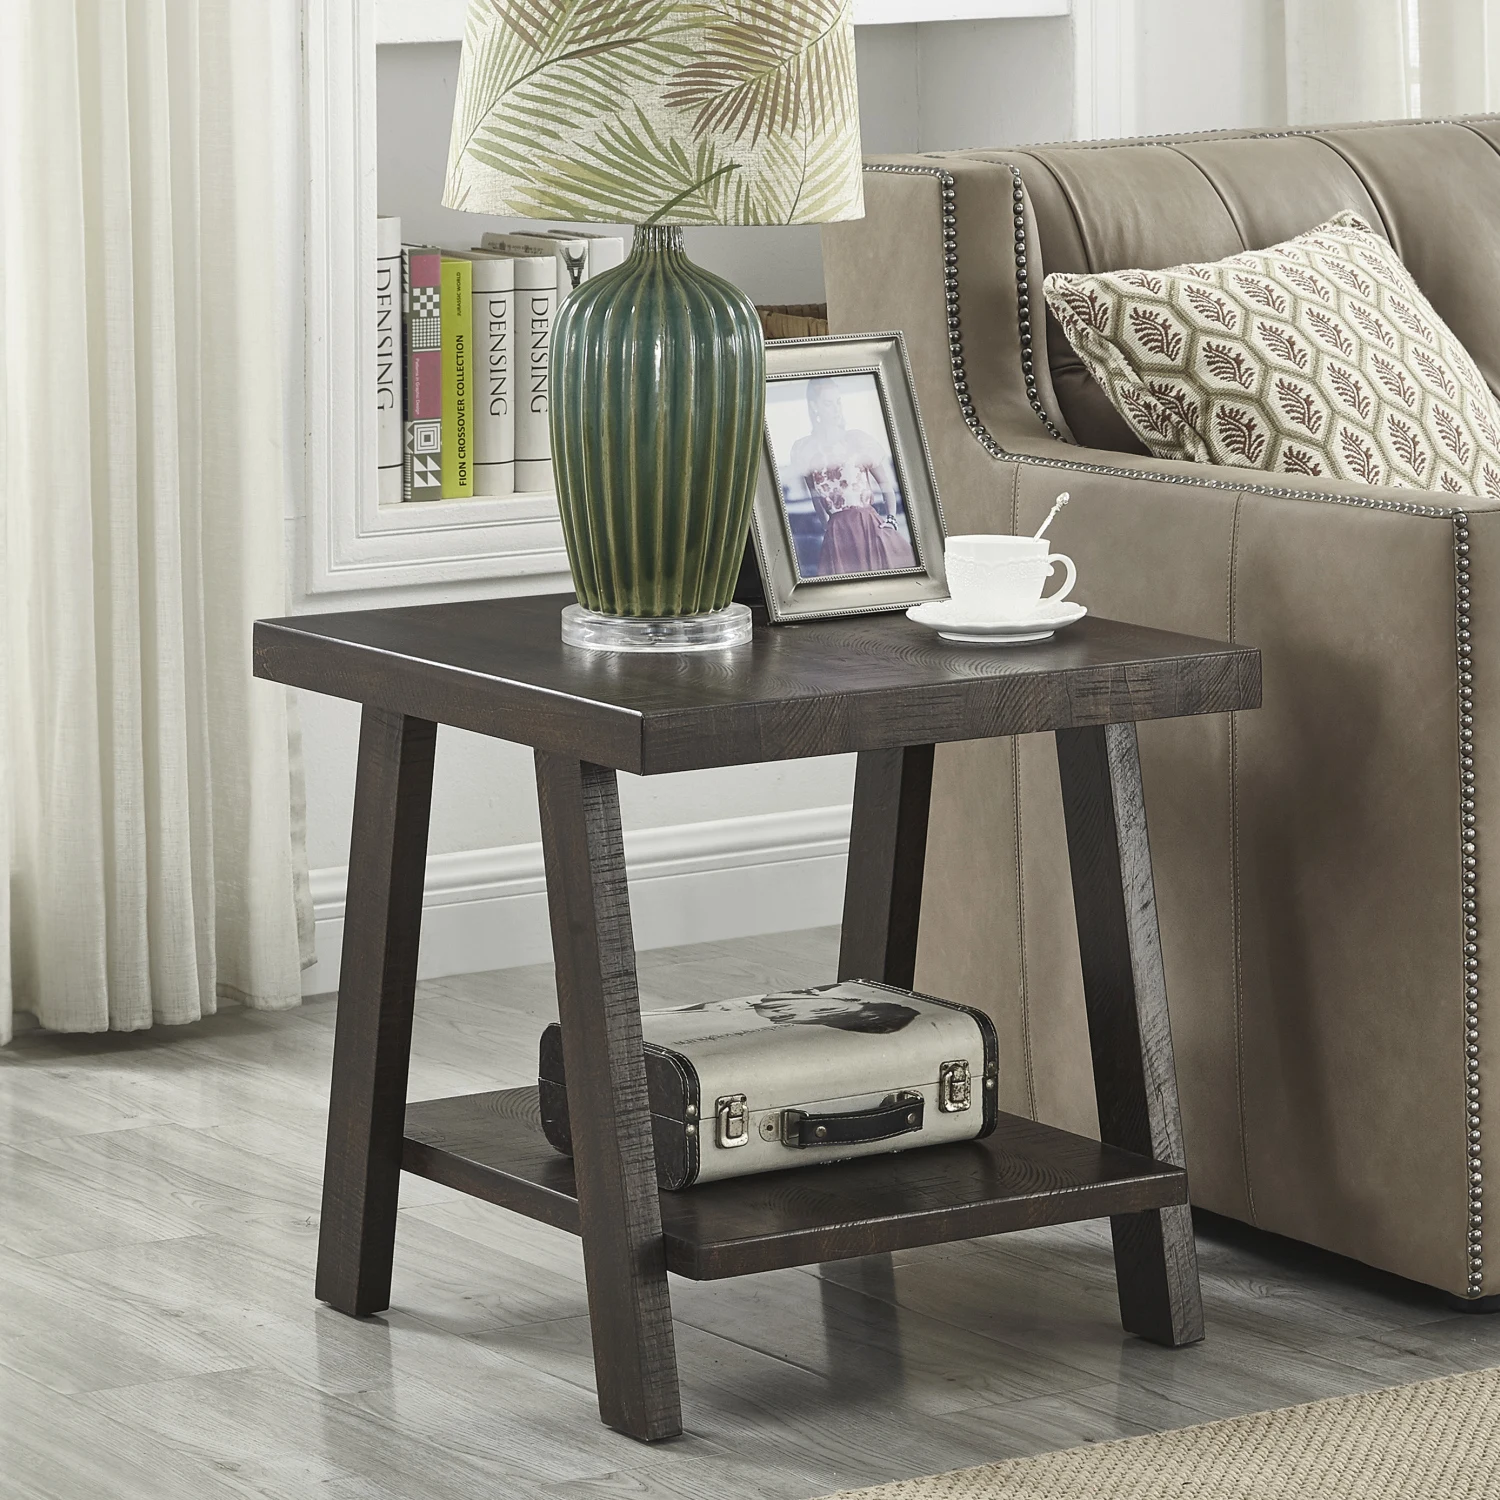 

Contemporary Athens Weathered Espresso Wood End Table with Stylish Shelves for Modern Living Room Decor and Organization